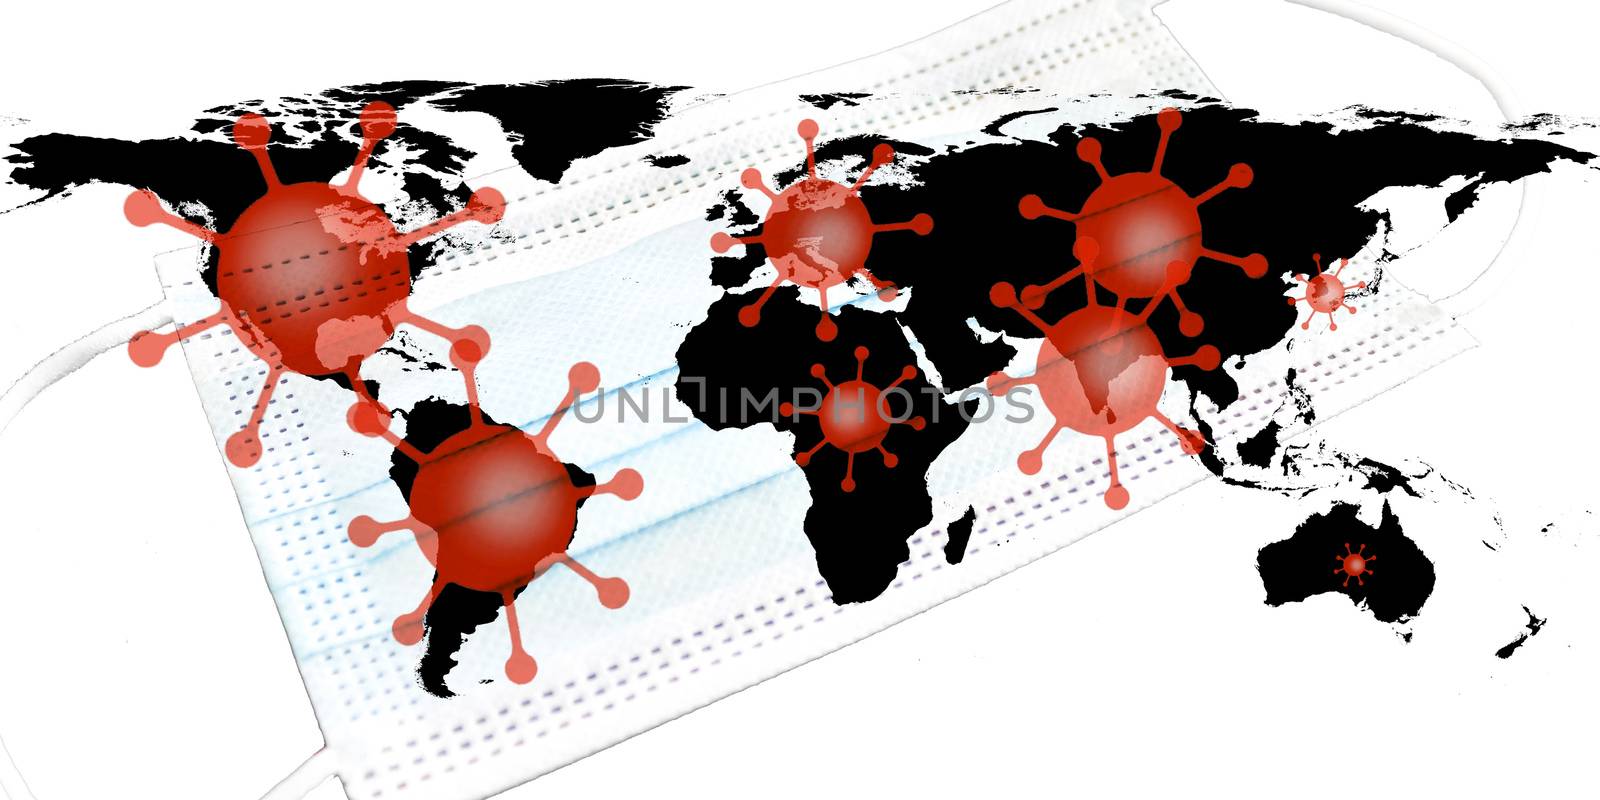 Illutration of a world map showing corona virus hotspots in the  by MP_foto71